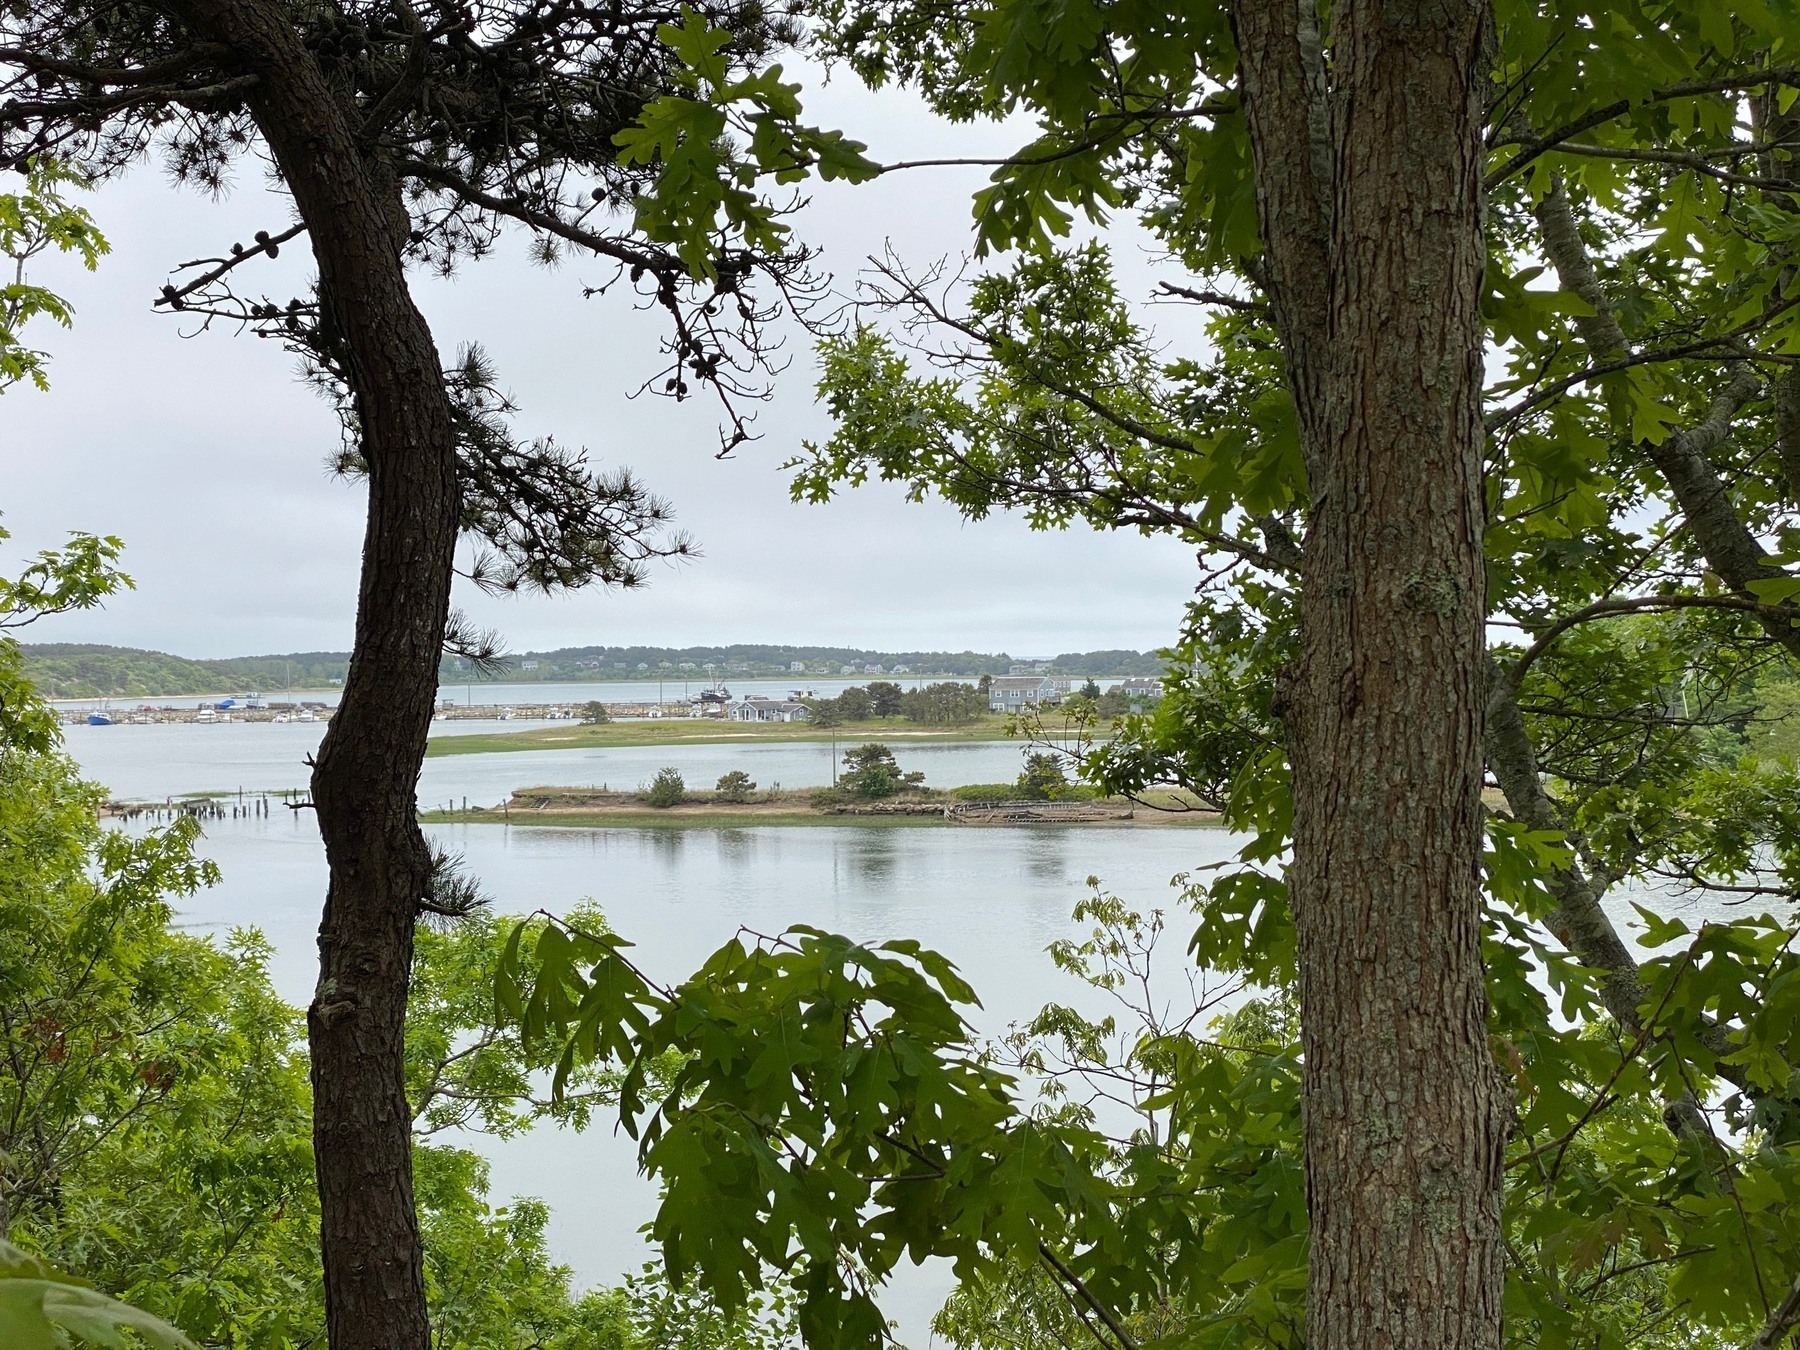 View of Duck Harbor with spits of land in the background, framed by tree trunks on the left and right and green leaves above and below.